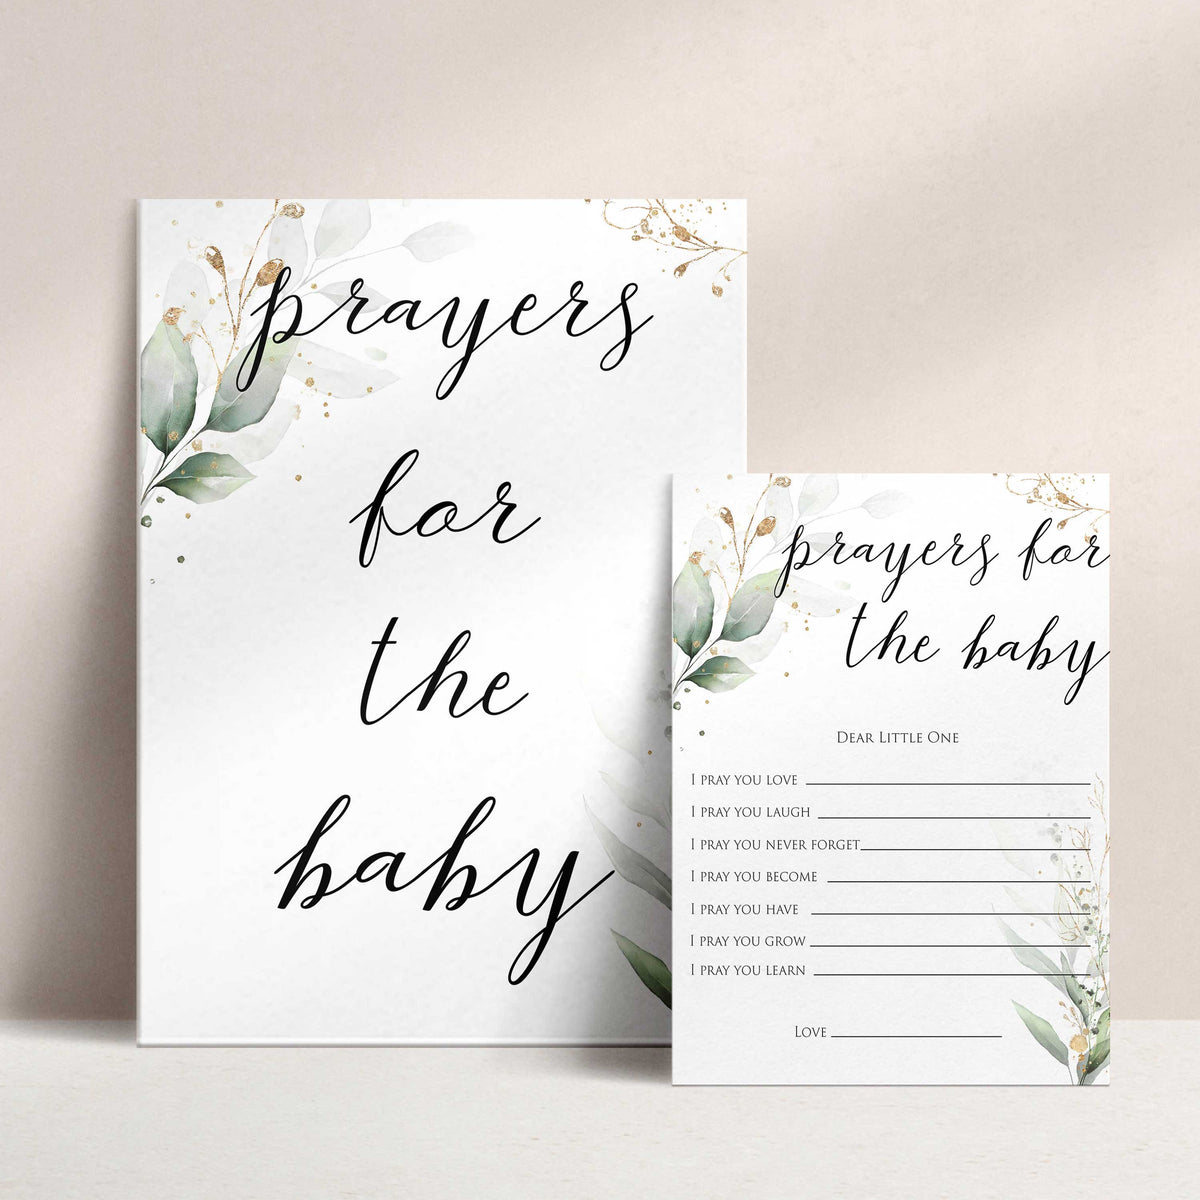 Gold green leaf baby games, prayers for the baby, printable baby games, fun baby games, top baby games to play, gold leaf baby shower, greenery baby shower ideas